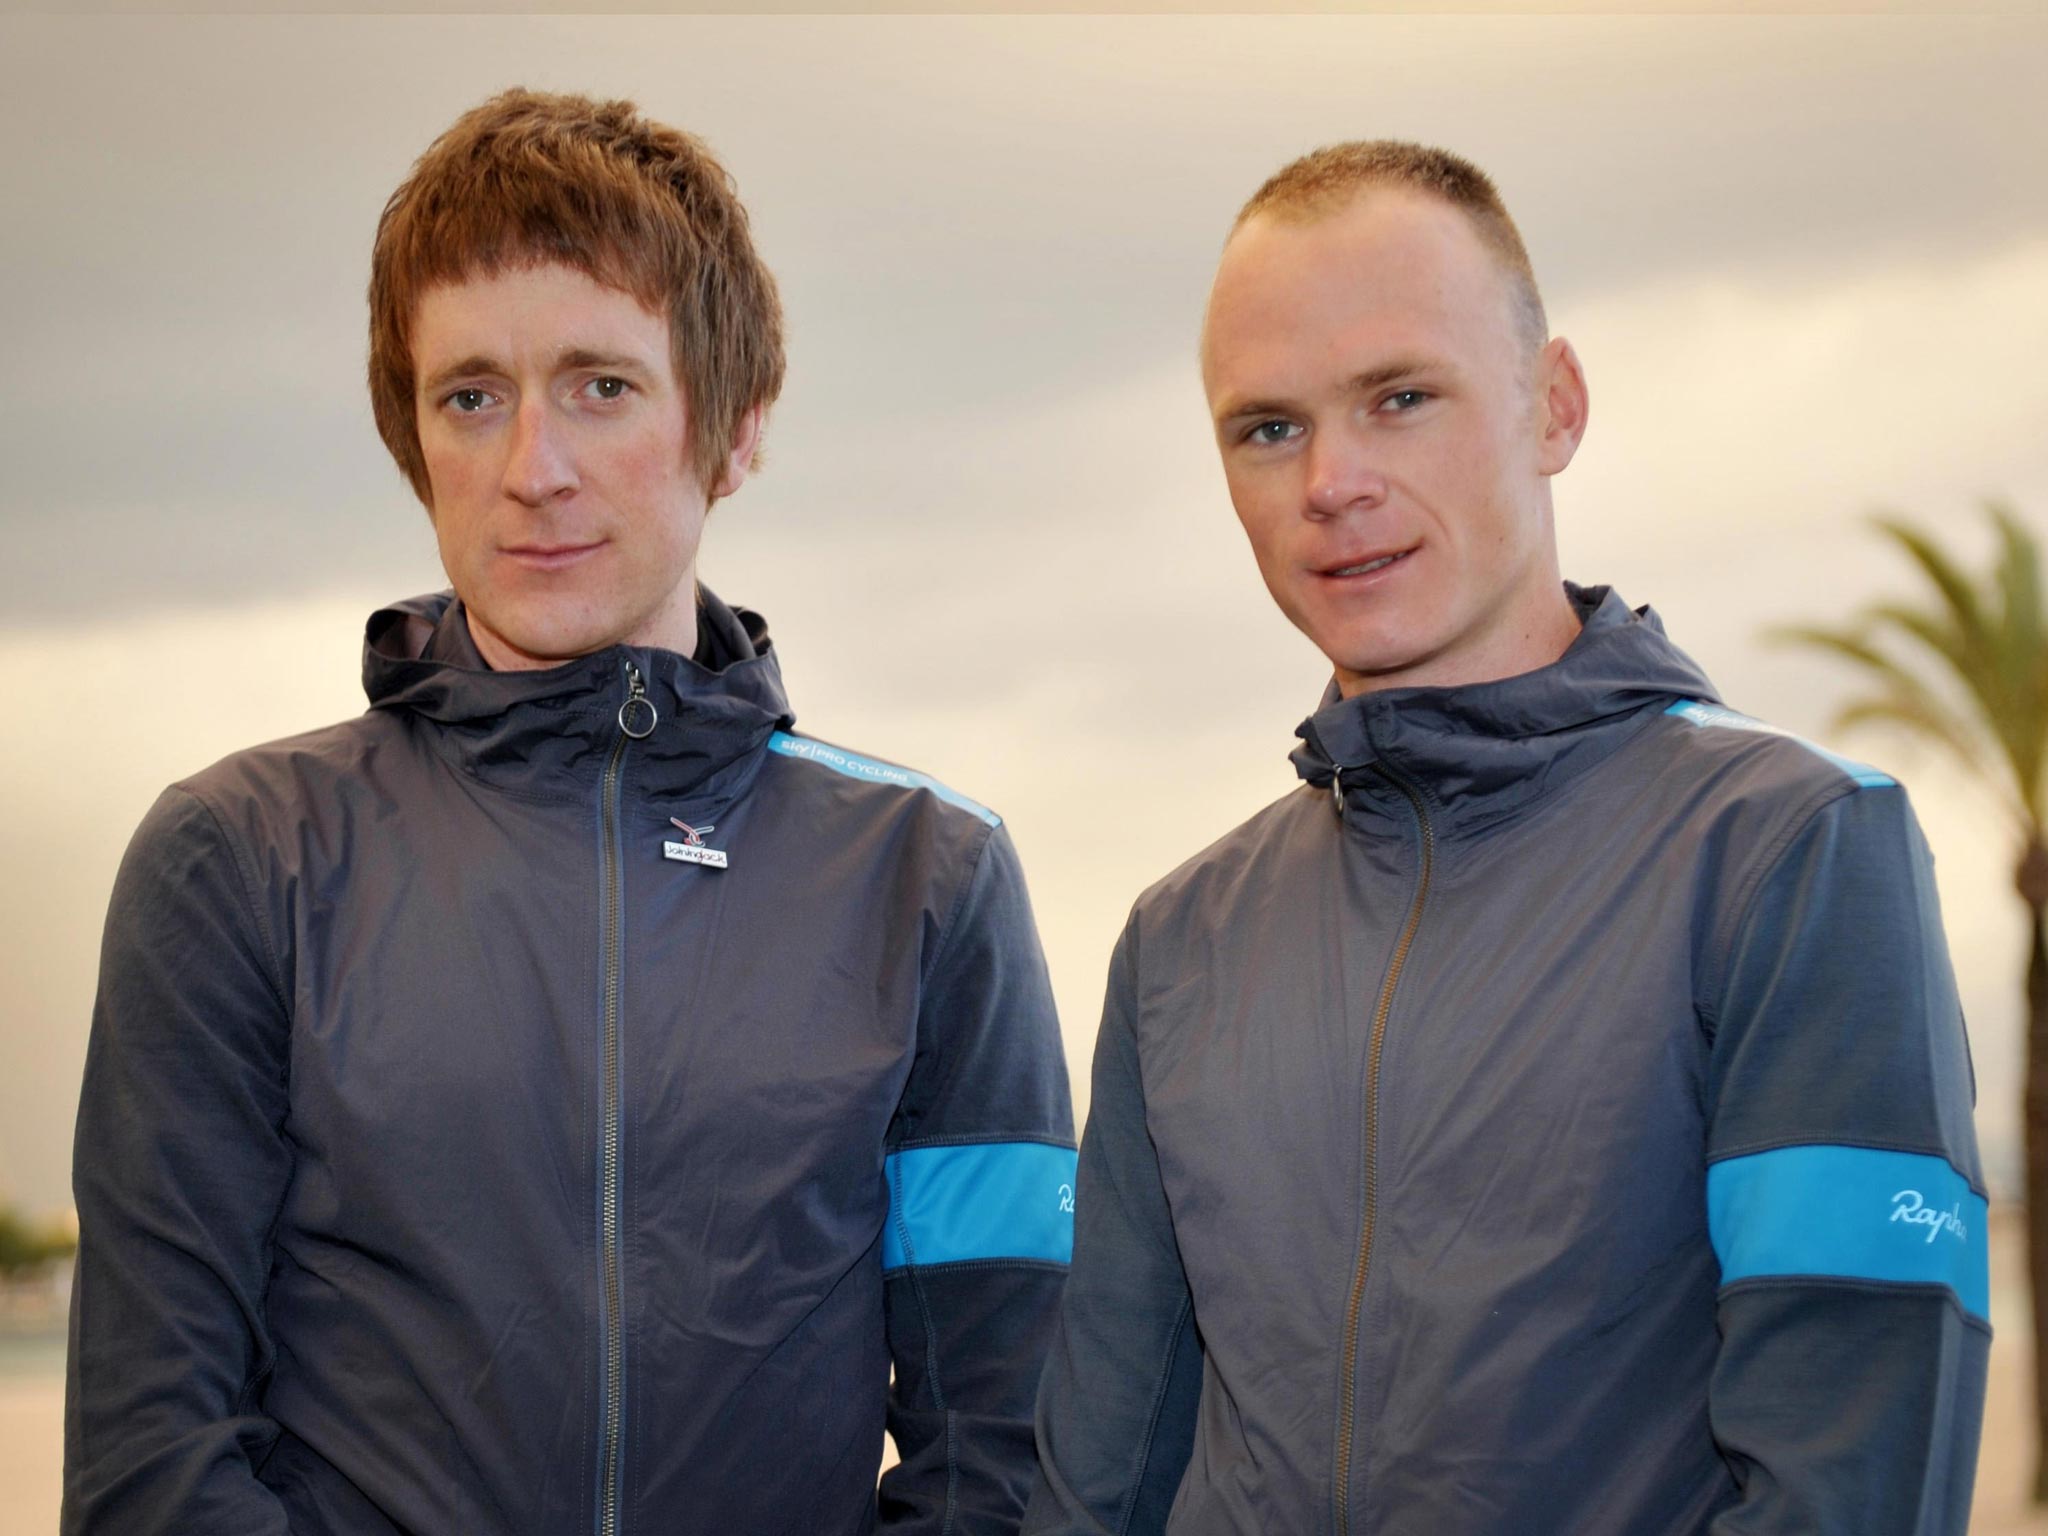 Sir Bradley Wiggins (left) and Chris Froome (right)